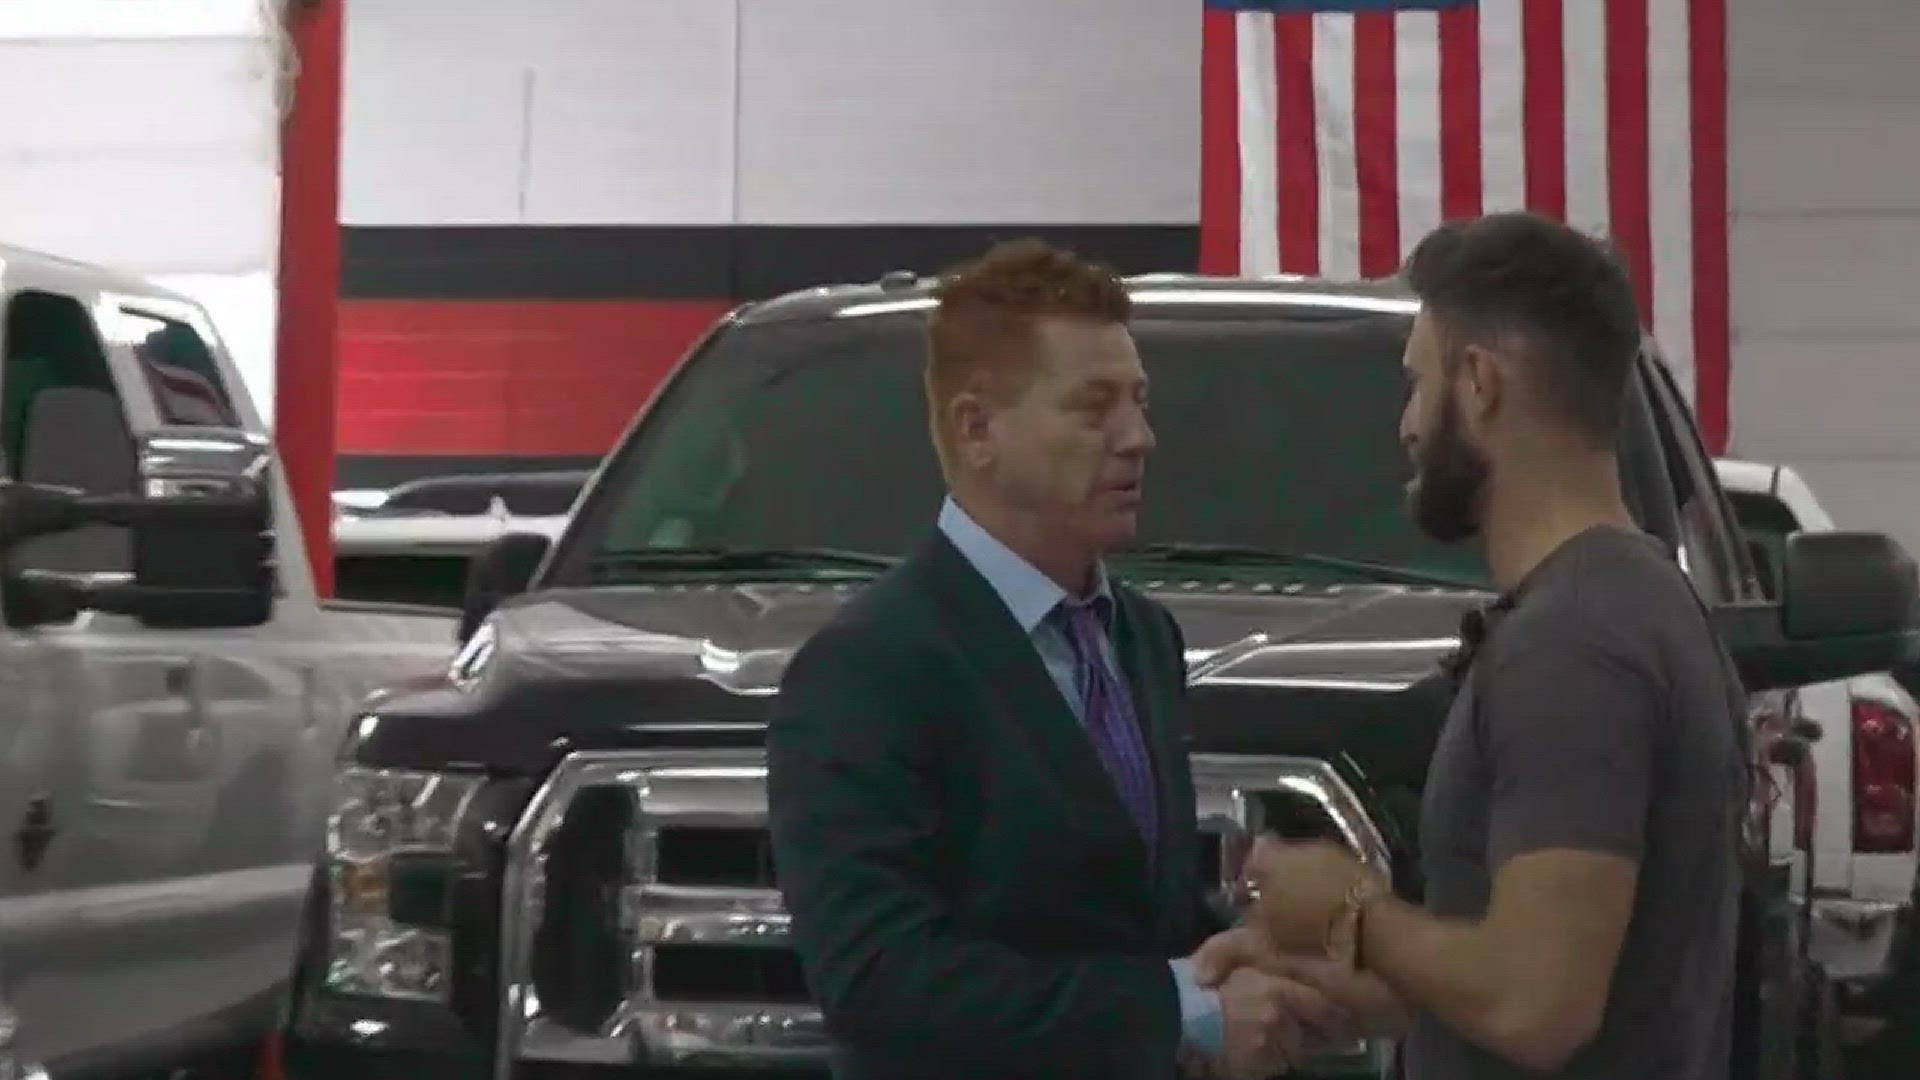 The owner of B5 Motors in Gilbert rewarded veteran Taylor Winston with a Ford F-150 for his bravery of taking wounded victims to a hospital after seizing a truck during the Vegas mass shooting.